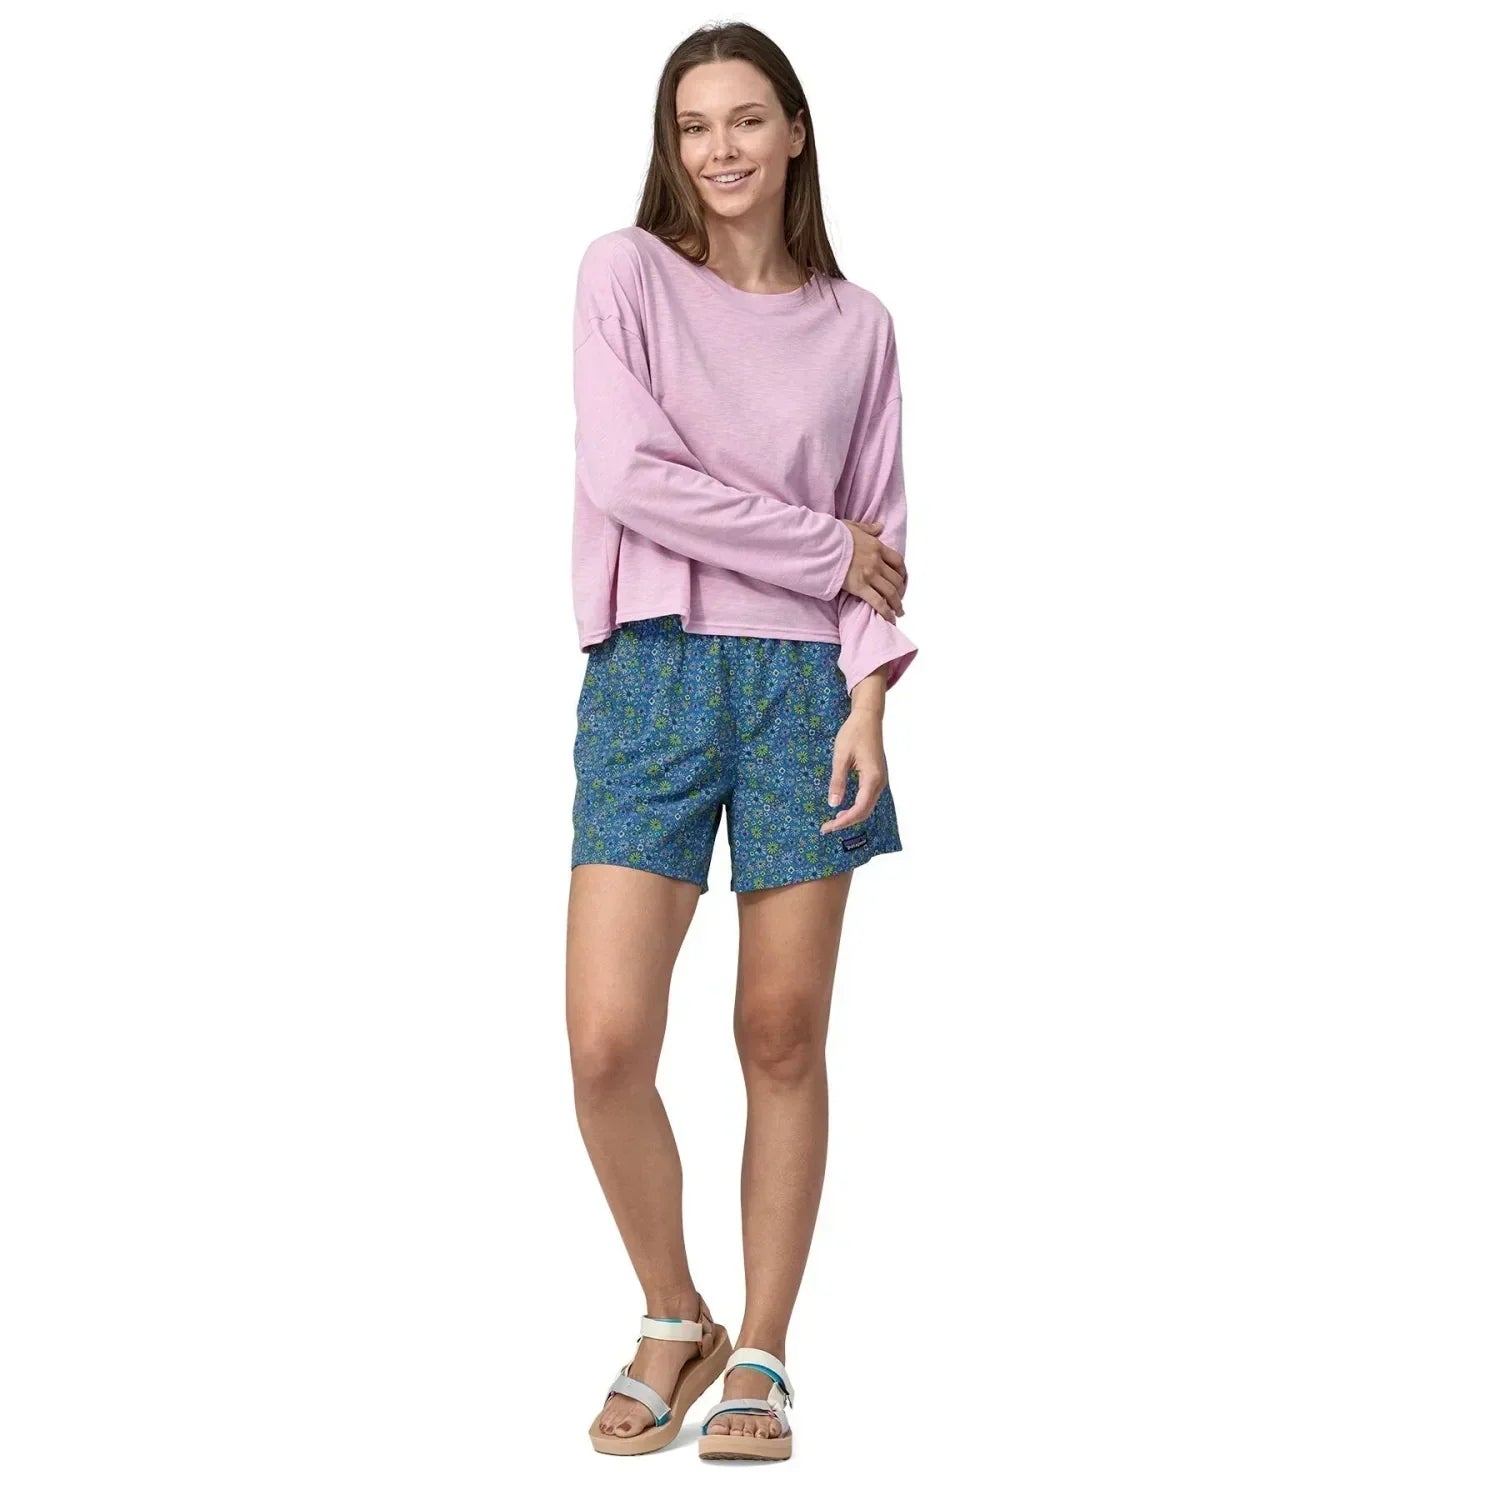 Patagonia 02. WOMENS APPAREL - WOMENS SHORTS - WOMENS SHORTS ACTIVE Women's Baggies Shorts - 5 in FLVE FLORAL FUN|VESSEL BLUE